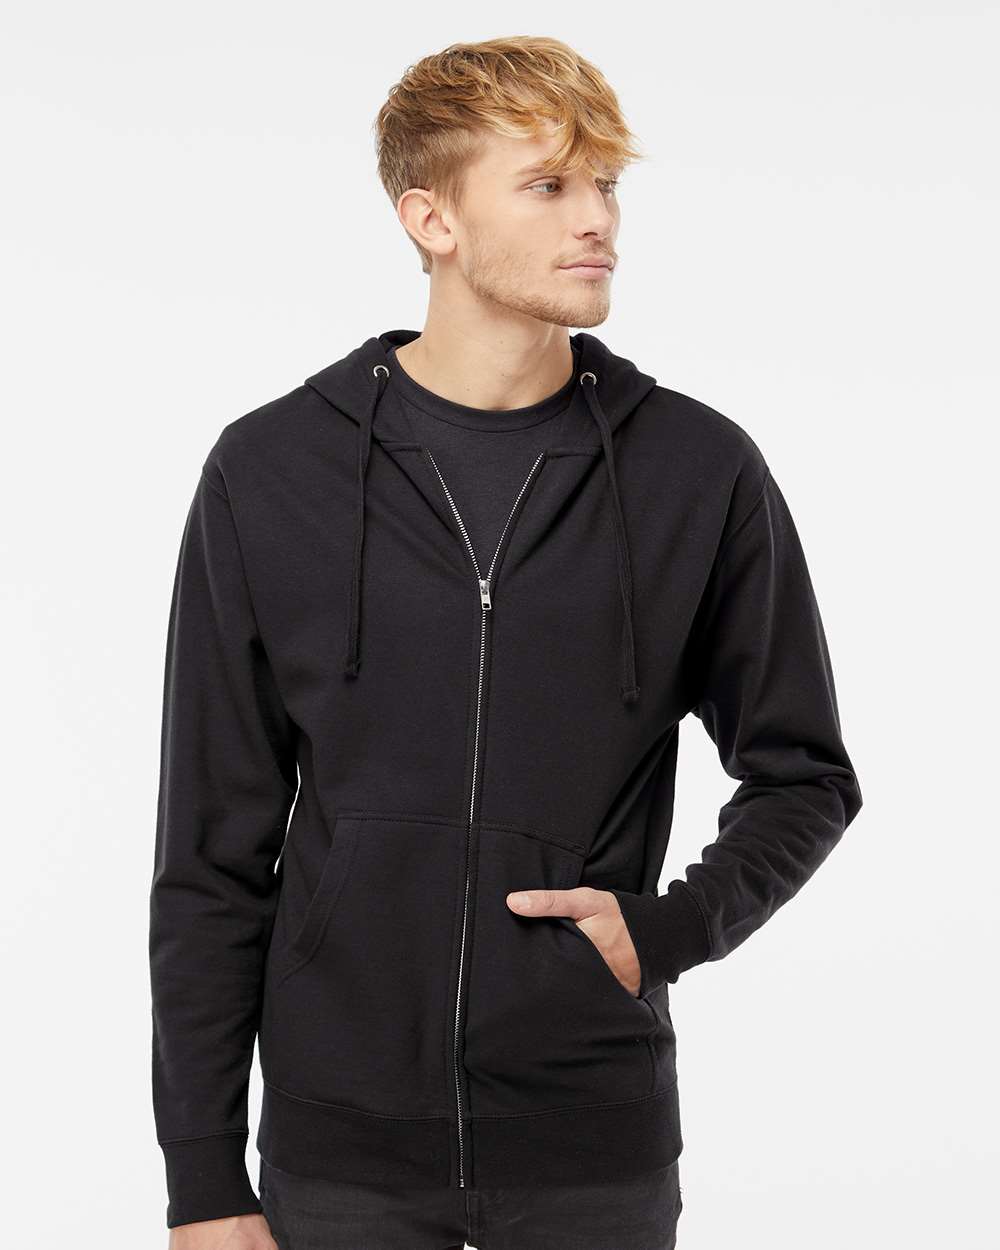 Independent Trading Co. Midweight Full-Zip Hooded Sweatshirt SS4500Z #colormdl_Black